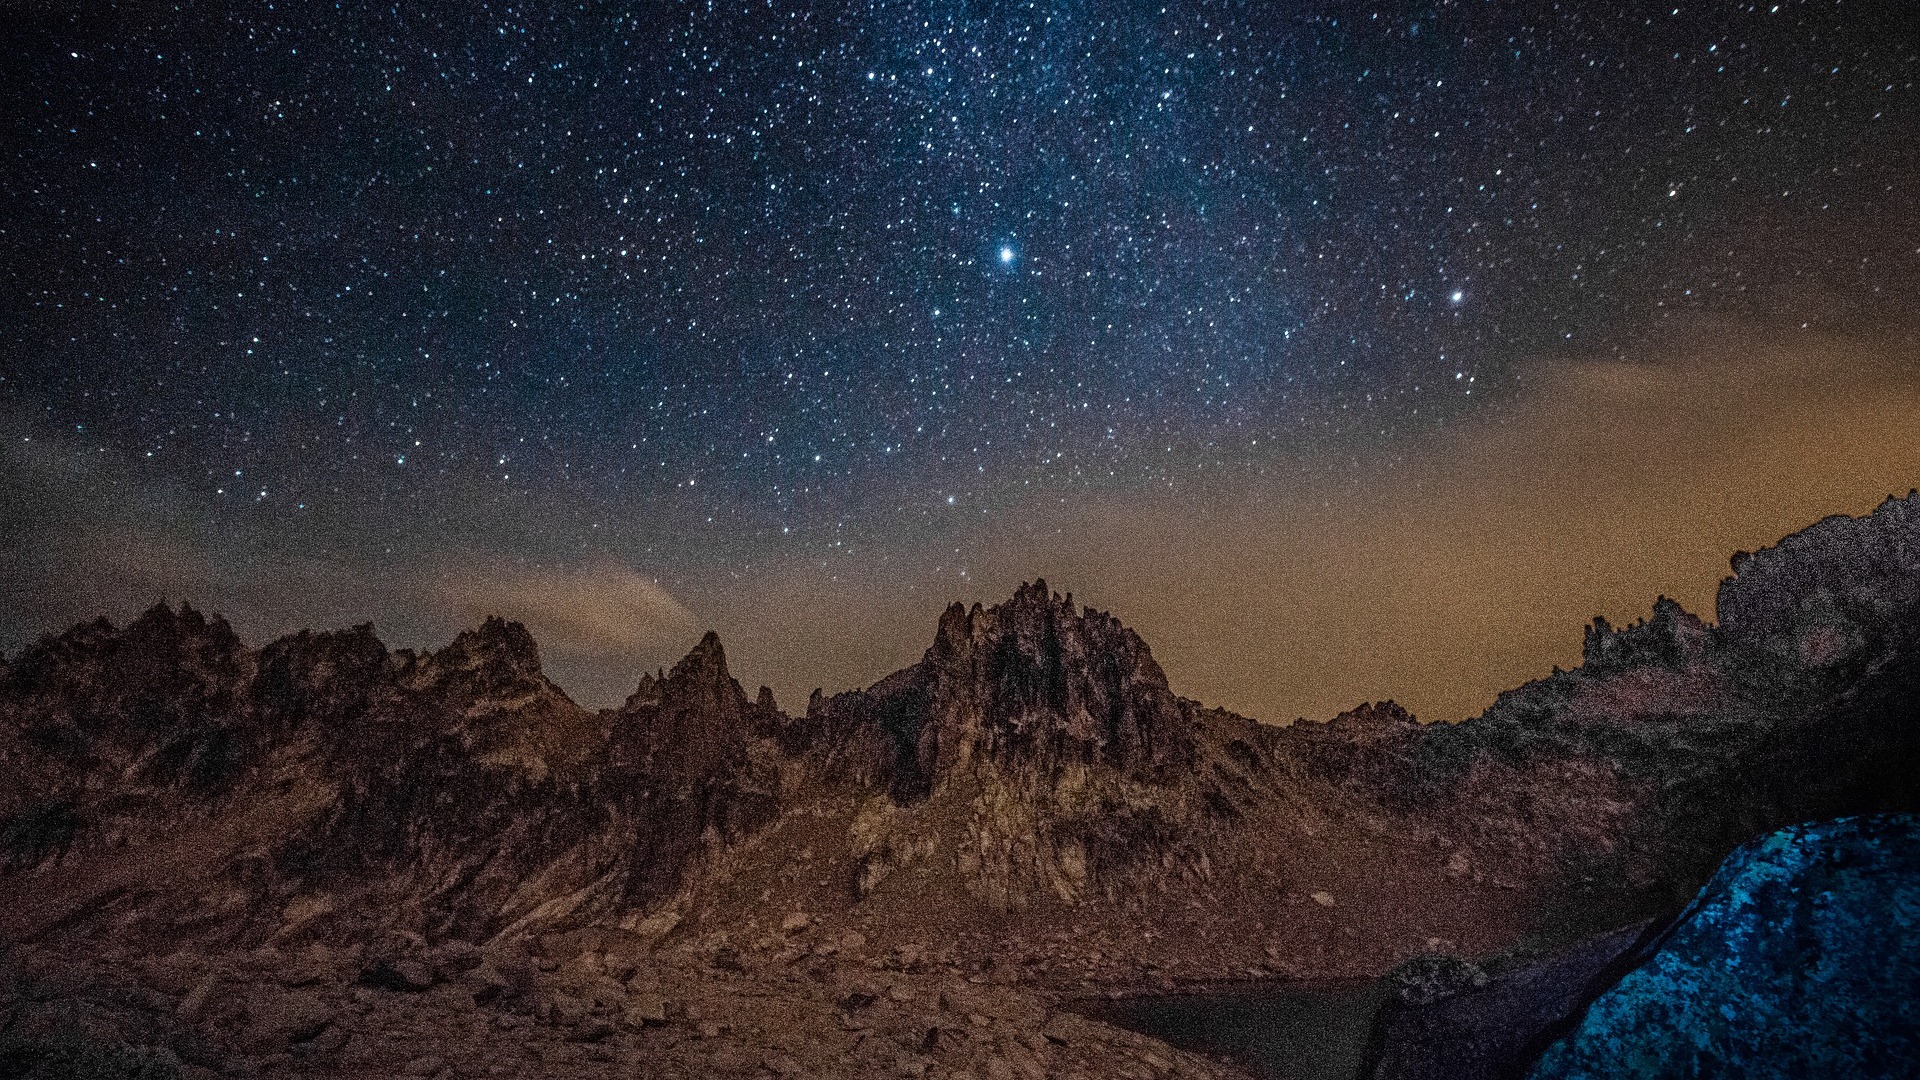 Andes Mountains by night